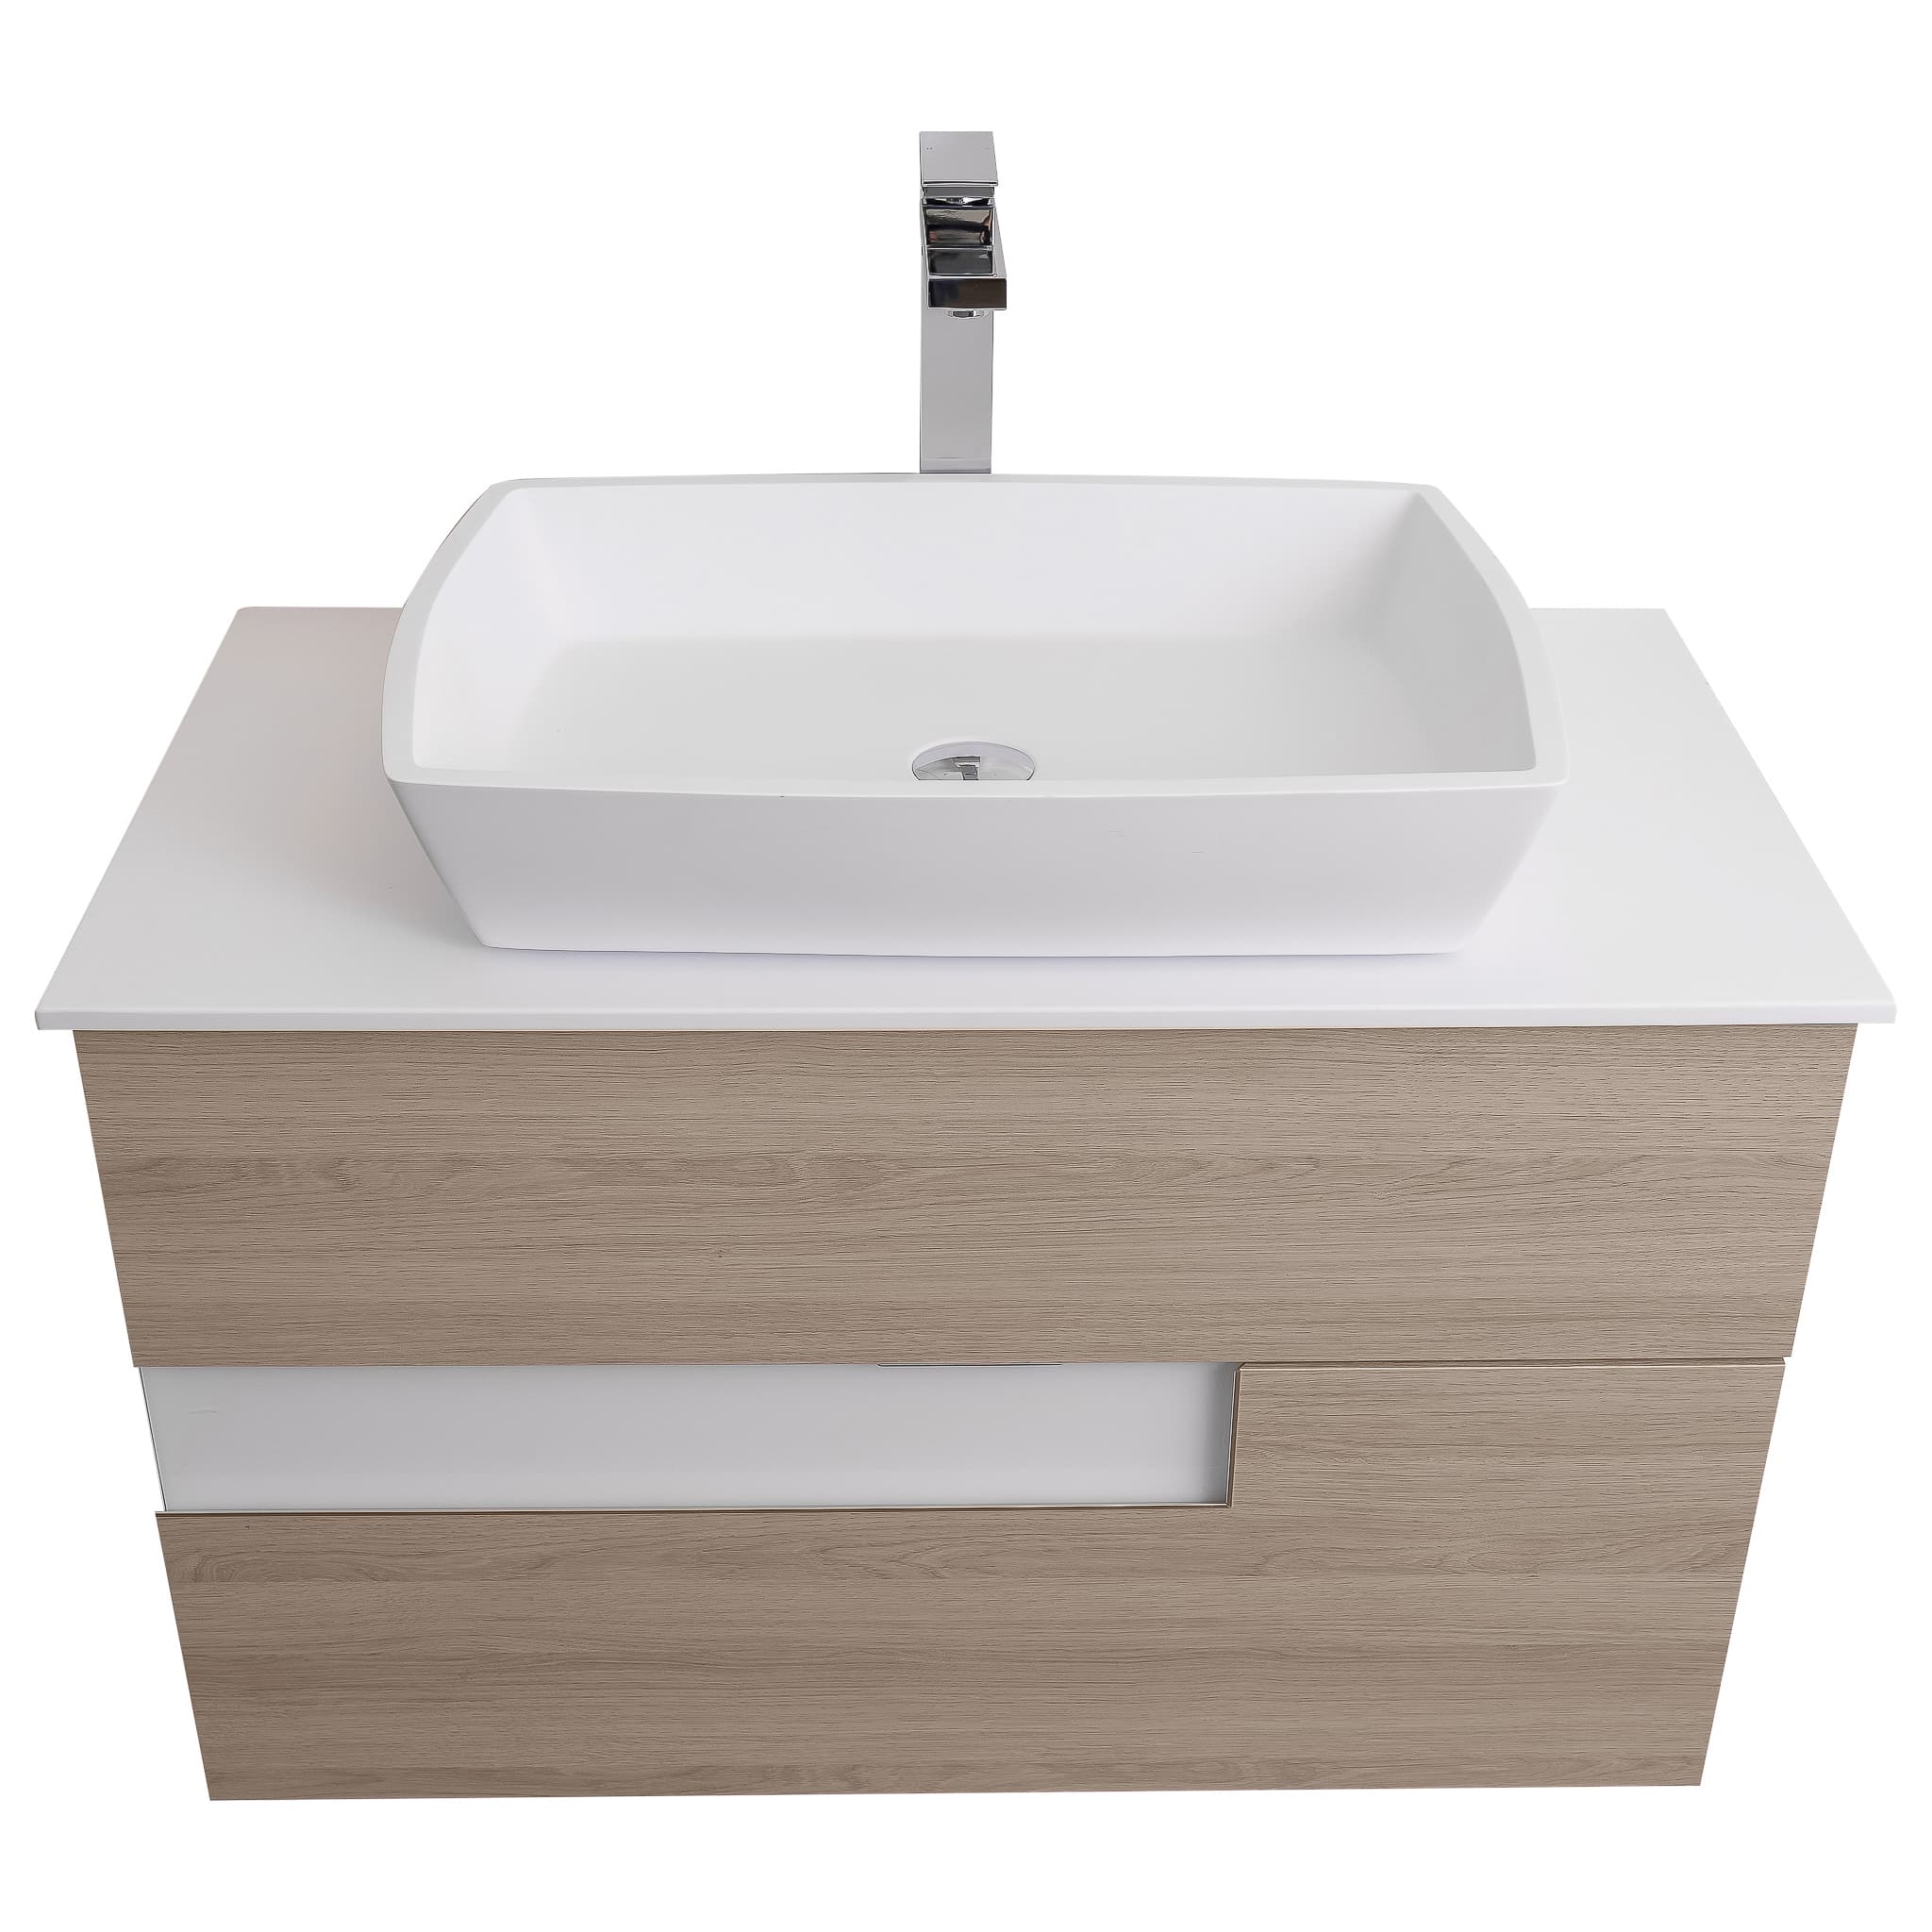 Vision 31.5 Natural Light Wood Cabinet, Solid Surface Flat White Counter And Square Solid Surface White Basin 1316, Wall Mounted Modern Vanity Set